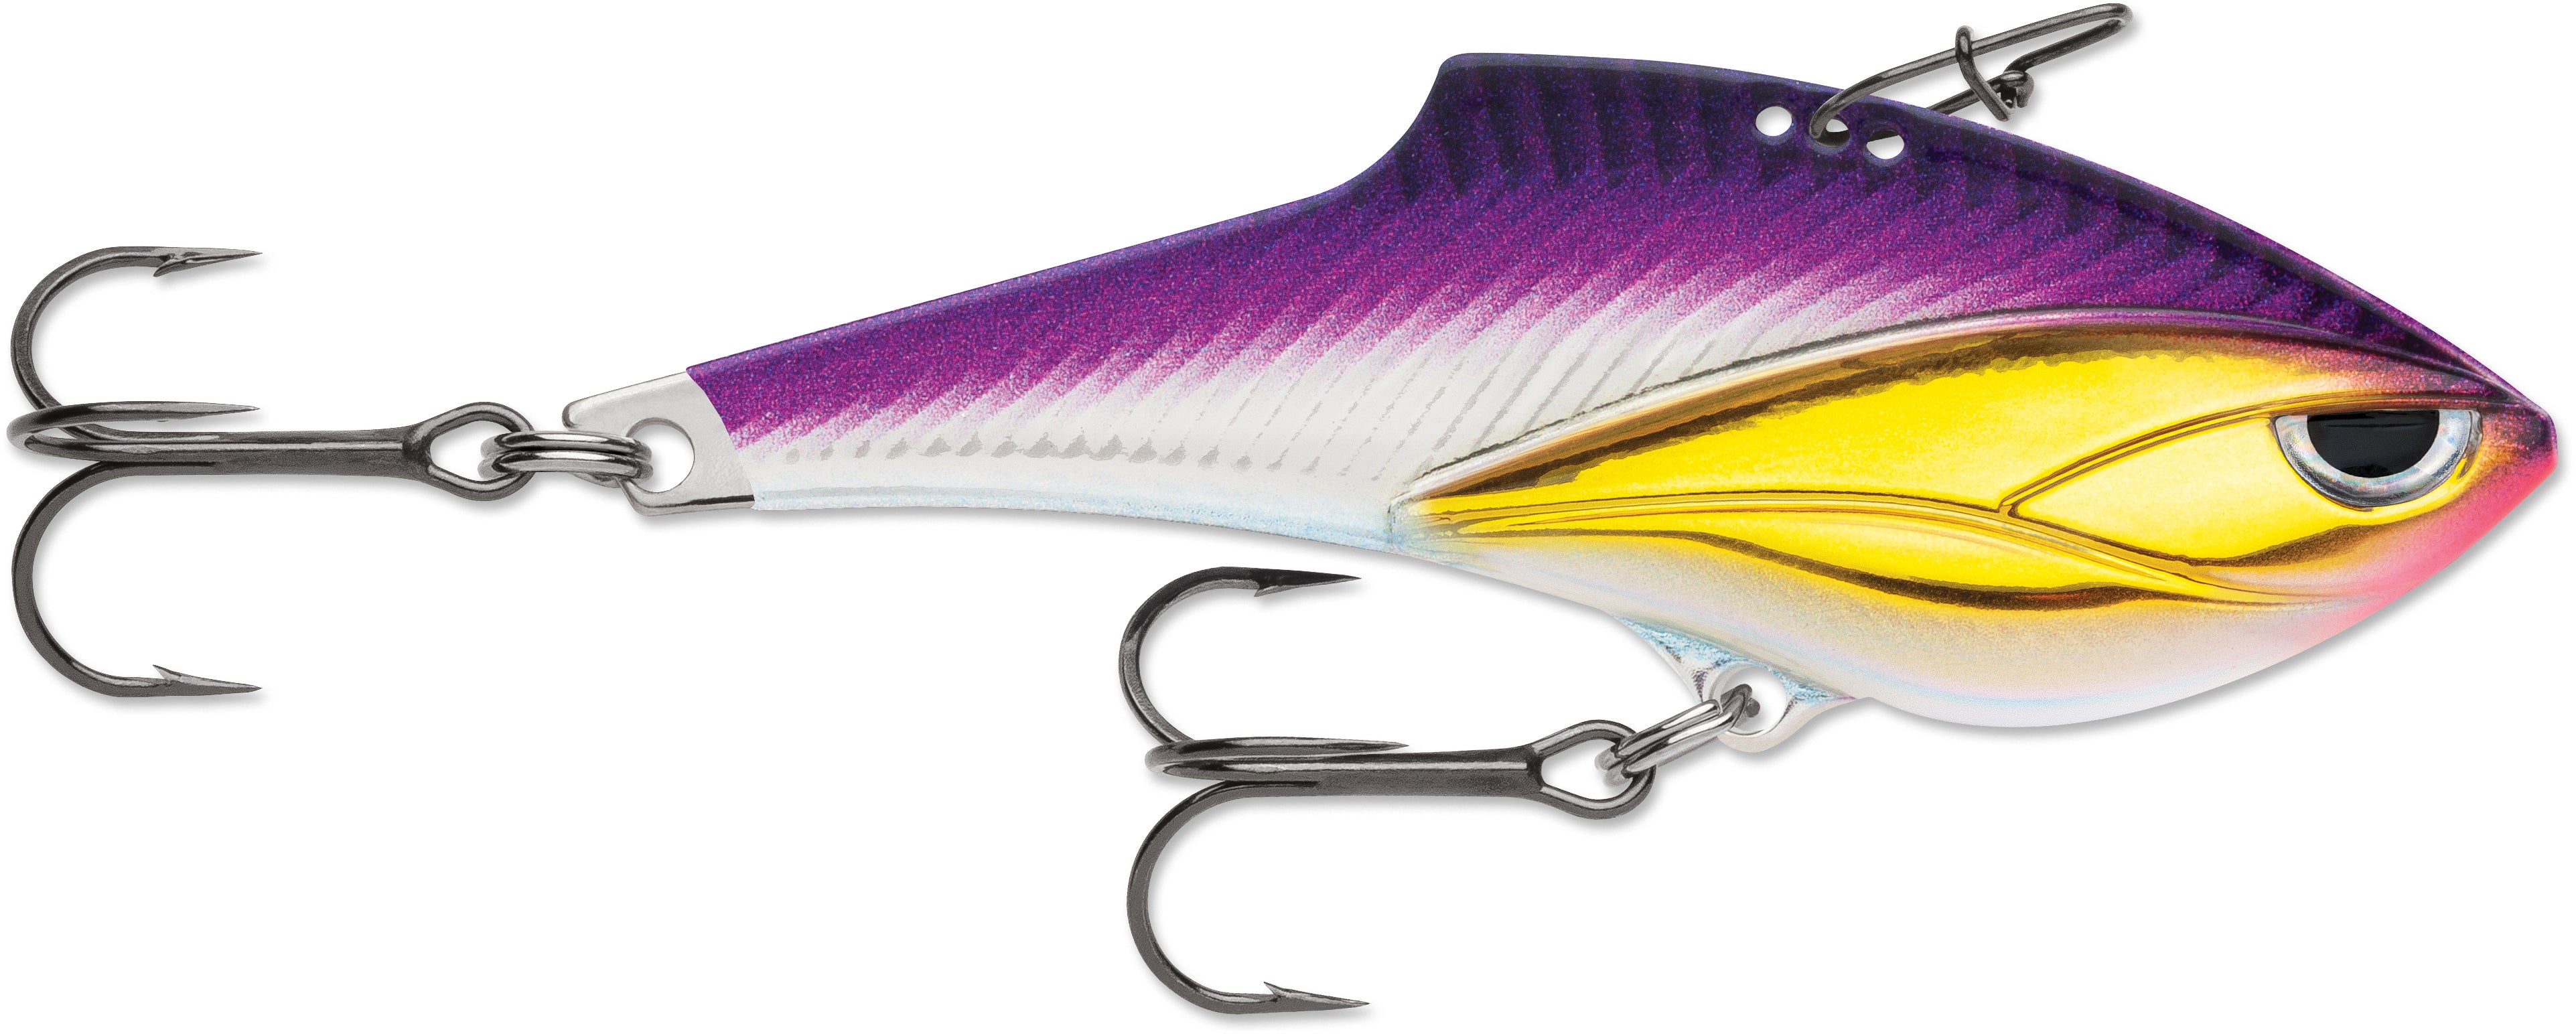 Rapala Rippin' Blade: Blade Bait - 2 3/4 Inch — Discount Tackle